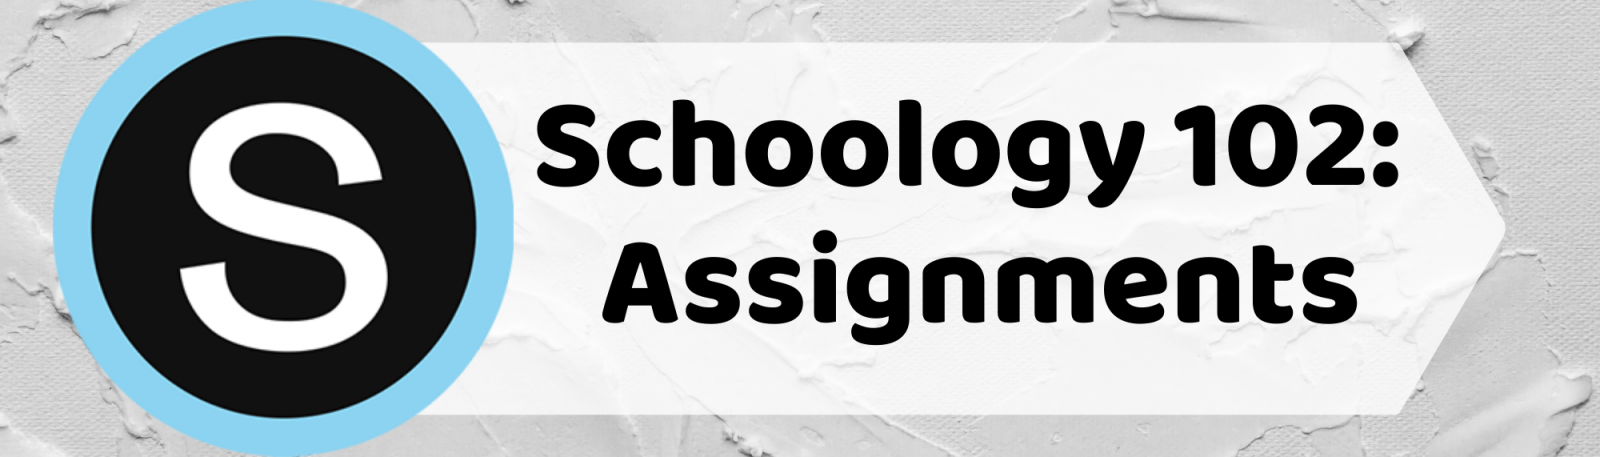 Schoology 102 | Assignments